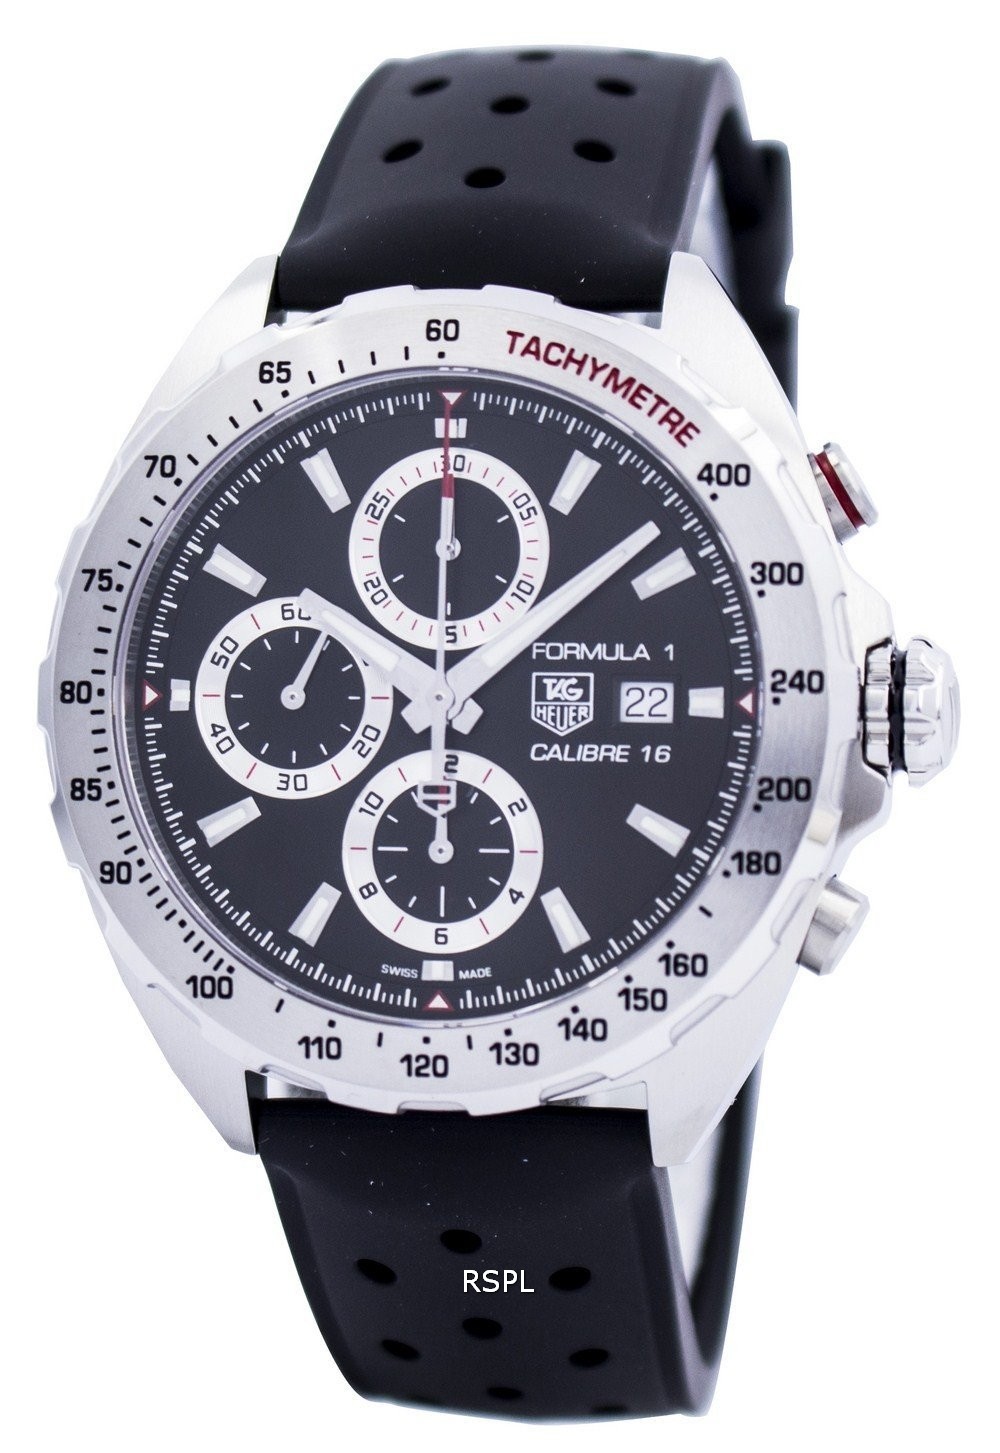 Tag Heuer Formula 1 Automatic Chronograph Men’s Watch.jpg  by citywatchesnz